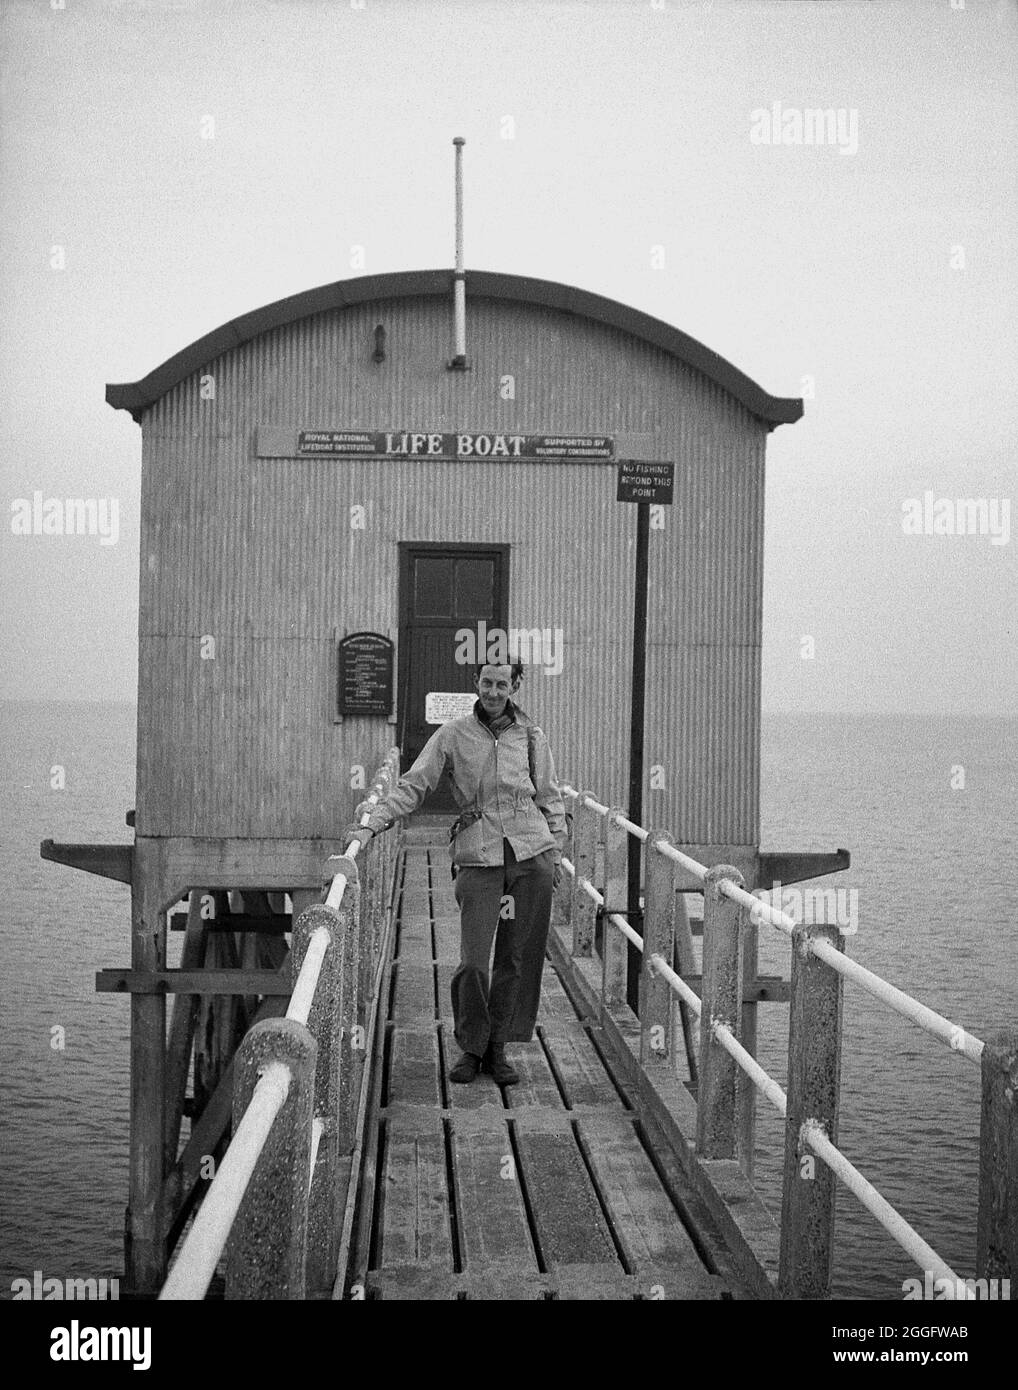 1950s, historical, a man standing on the wooden gangway in front of the old lifeboat station at Selsey, West Sussex, England, UK. A lifeboat service was established in Selsey in 1861. In 1927 to house the station's new motor lifeboat, the boat house was re-built and this structure is seen in the picture. This slipway station was again rebuilt in the late 1950s but was taken down in 2017. Stock Photo